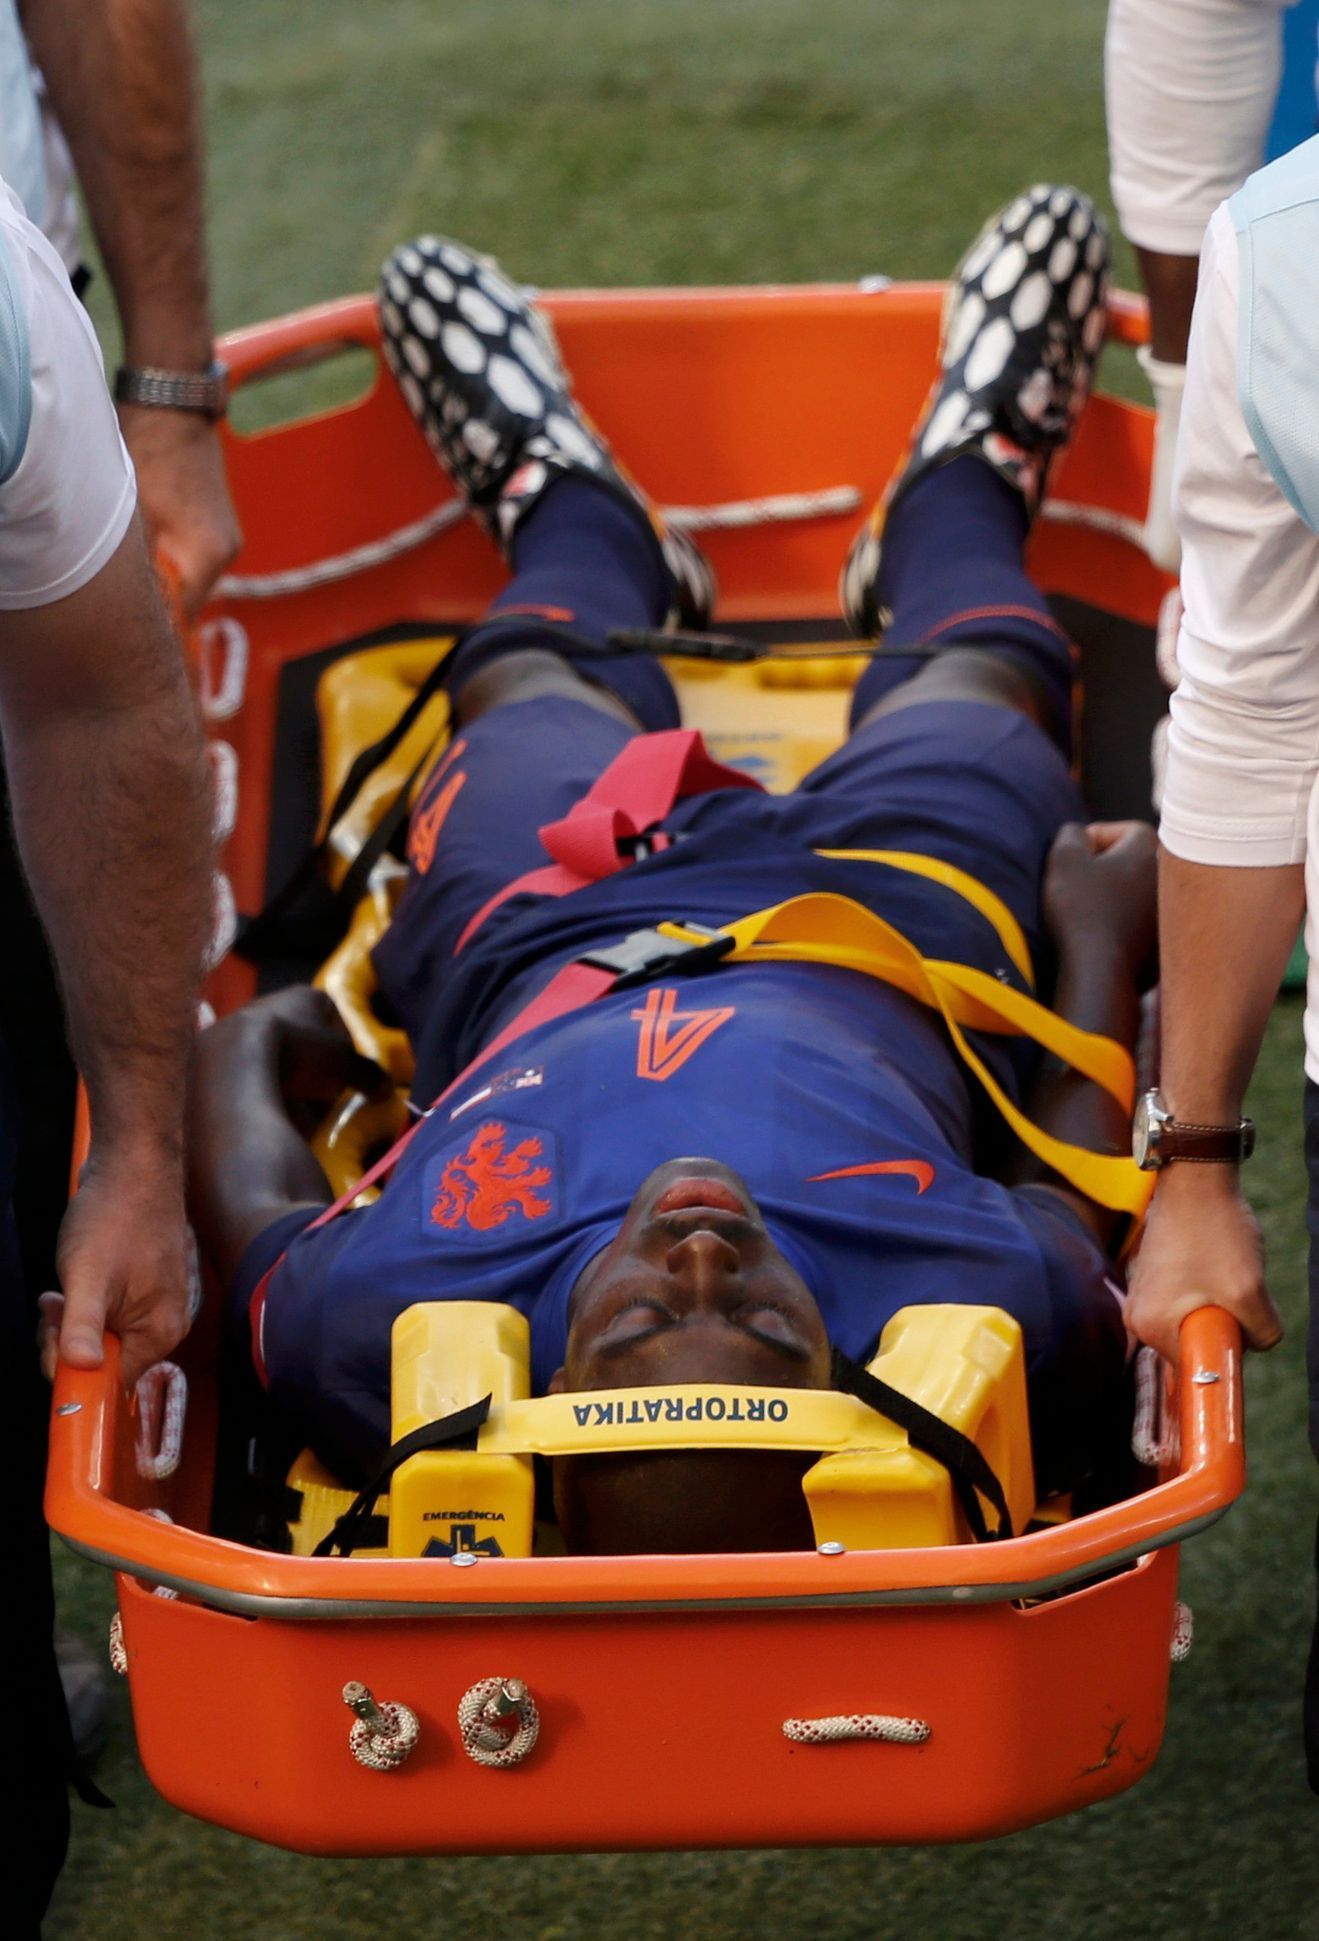 Martins Indi of the Netherlands is carried in a stretcher after being fouled by Australia's Cahill during their 2014 World Cup Group B soccer match at the Beira Rio stadium in Porto Alegre